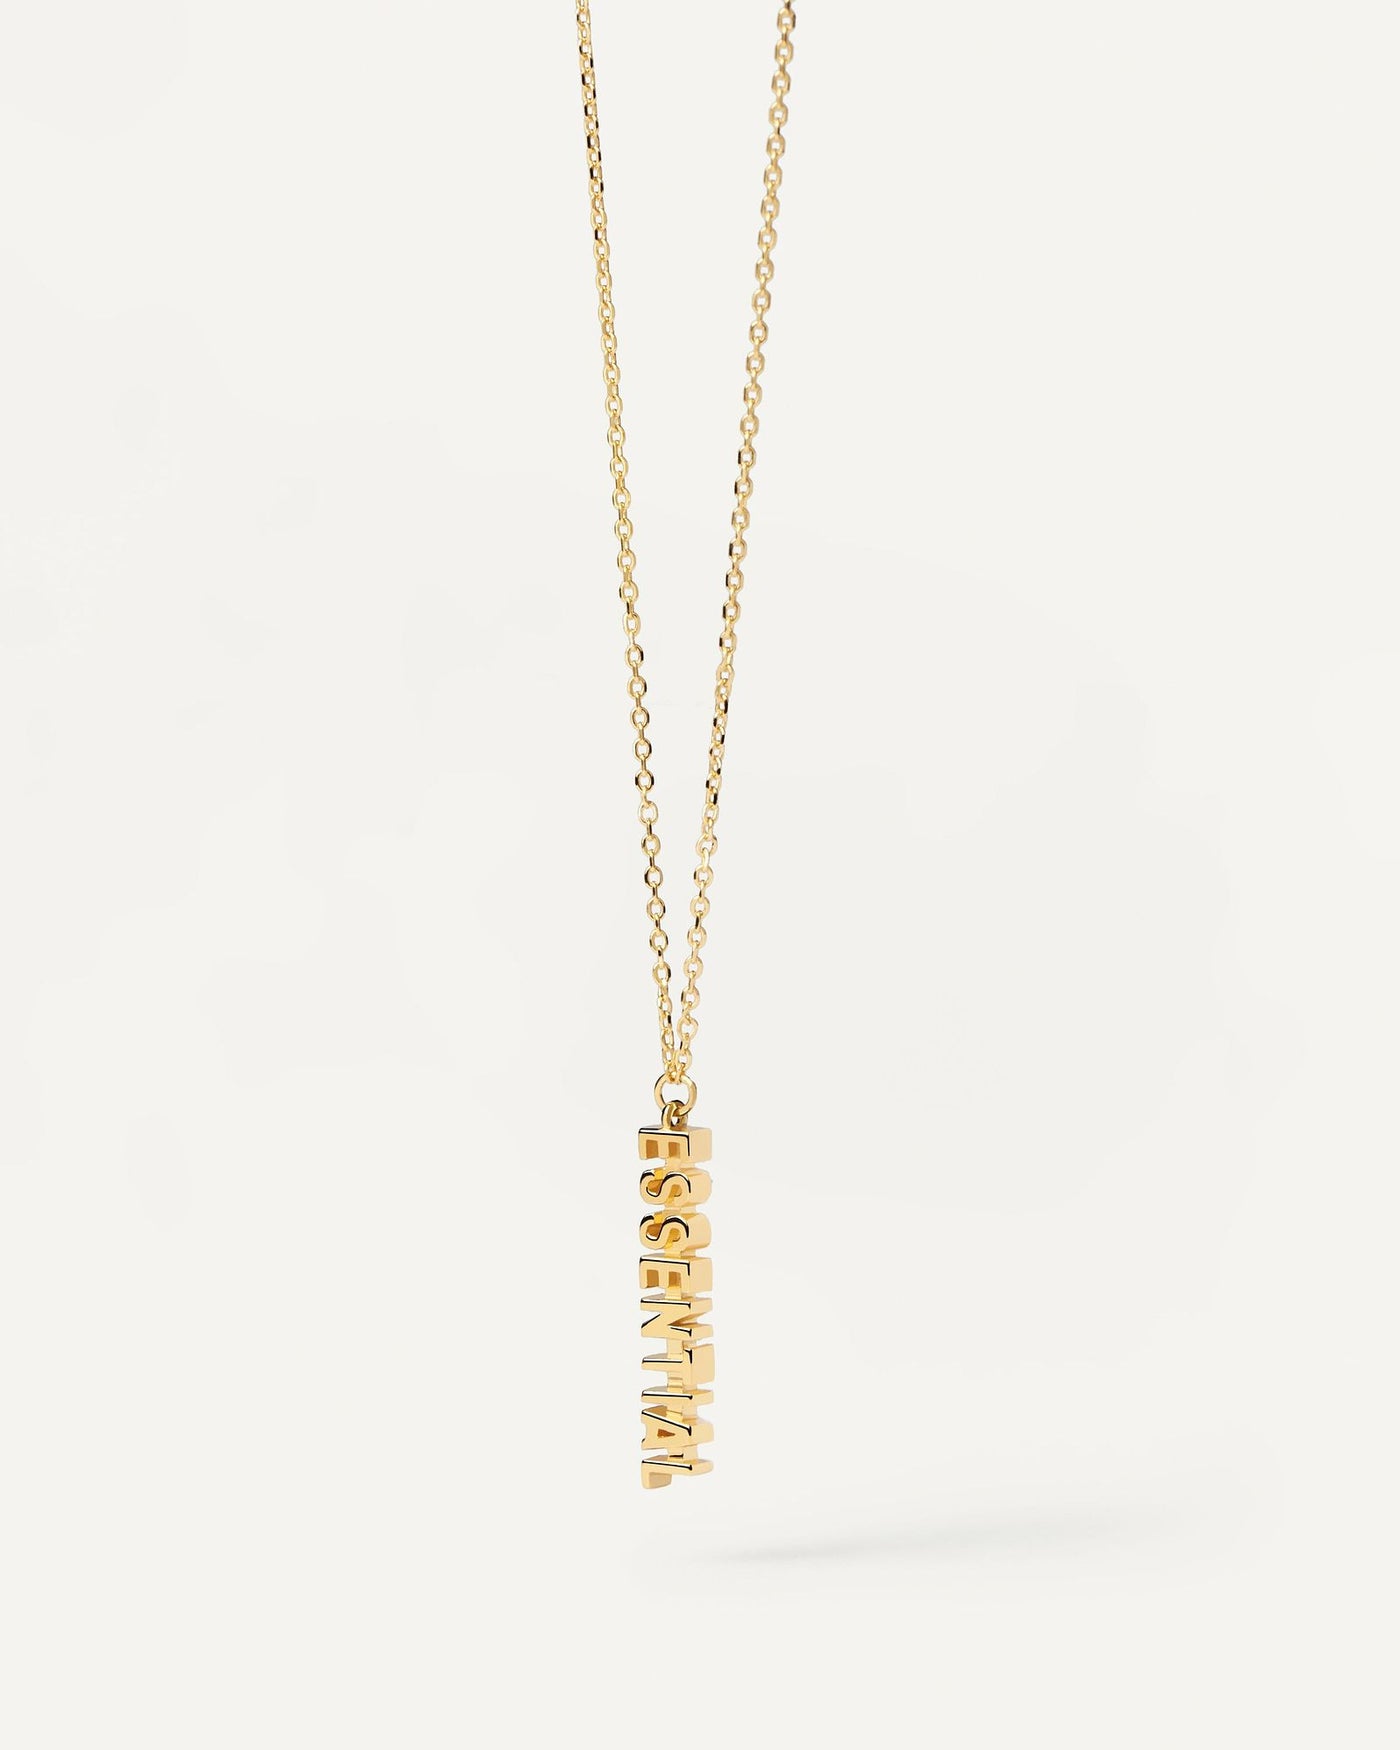 2024 Selection | Essential Necklace. Gold-plated silver necklace with a word pendant: Essential. Get the latest arrival from PDPAOLA. Place your order safely and get this Best Seller. Free Shipping.